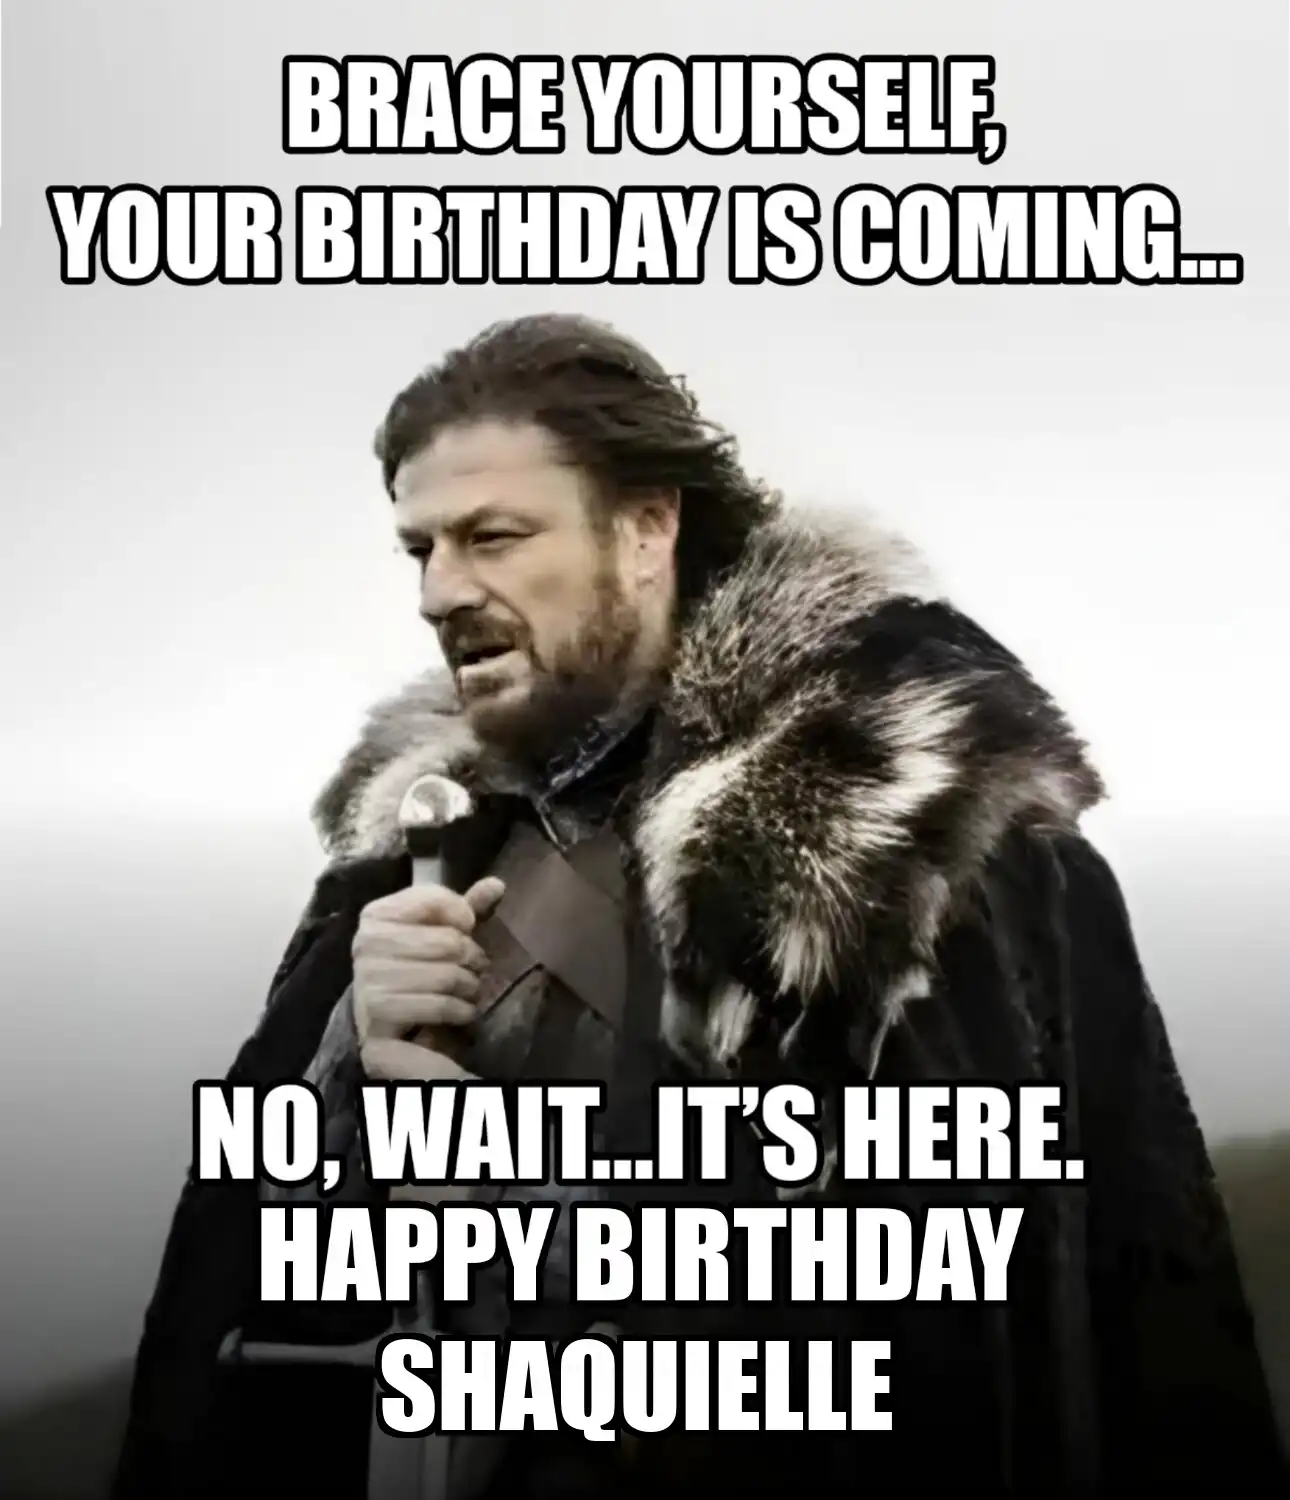 Happy Birthday Shaquielle Brace Yourself Your Birthday Is Coming Meme